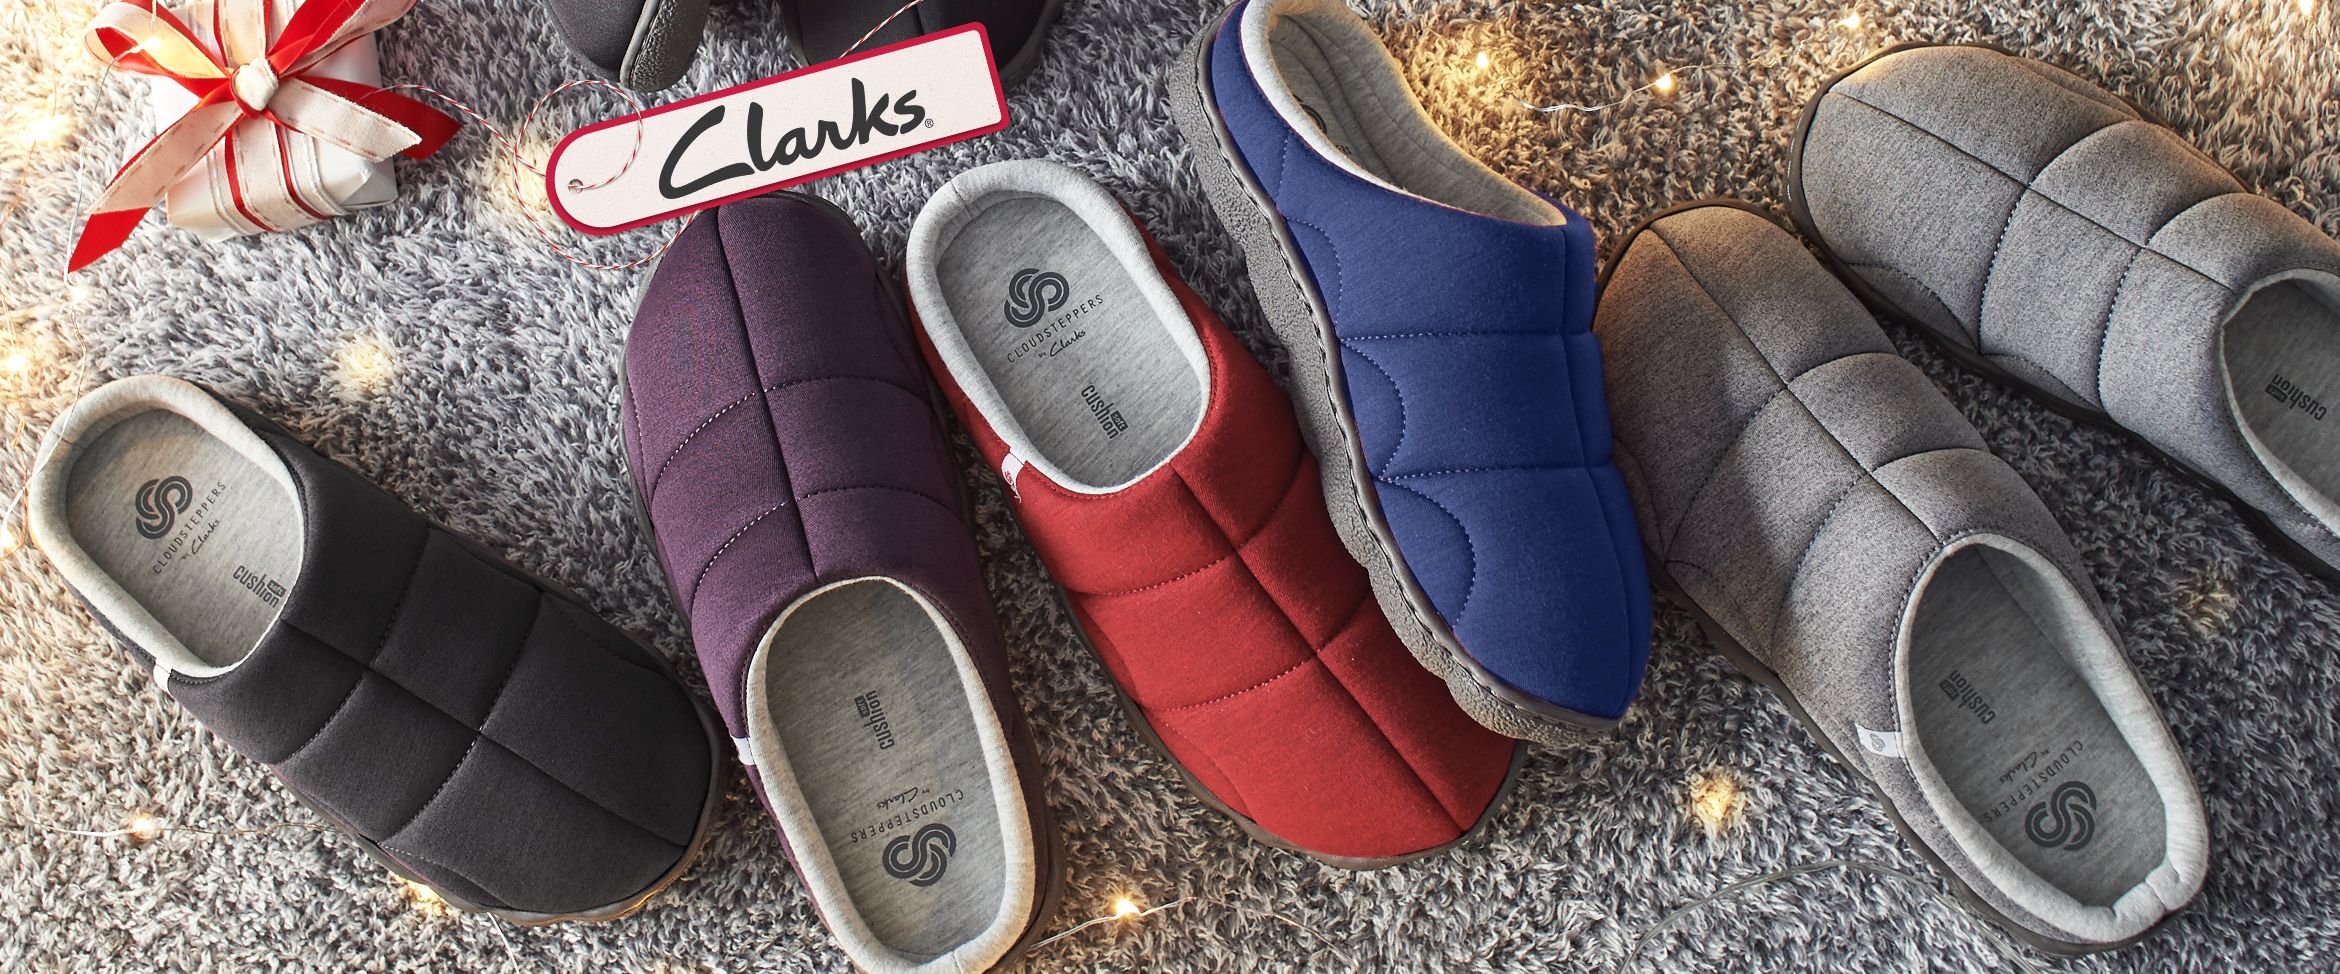 qvc clarks slippers